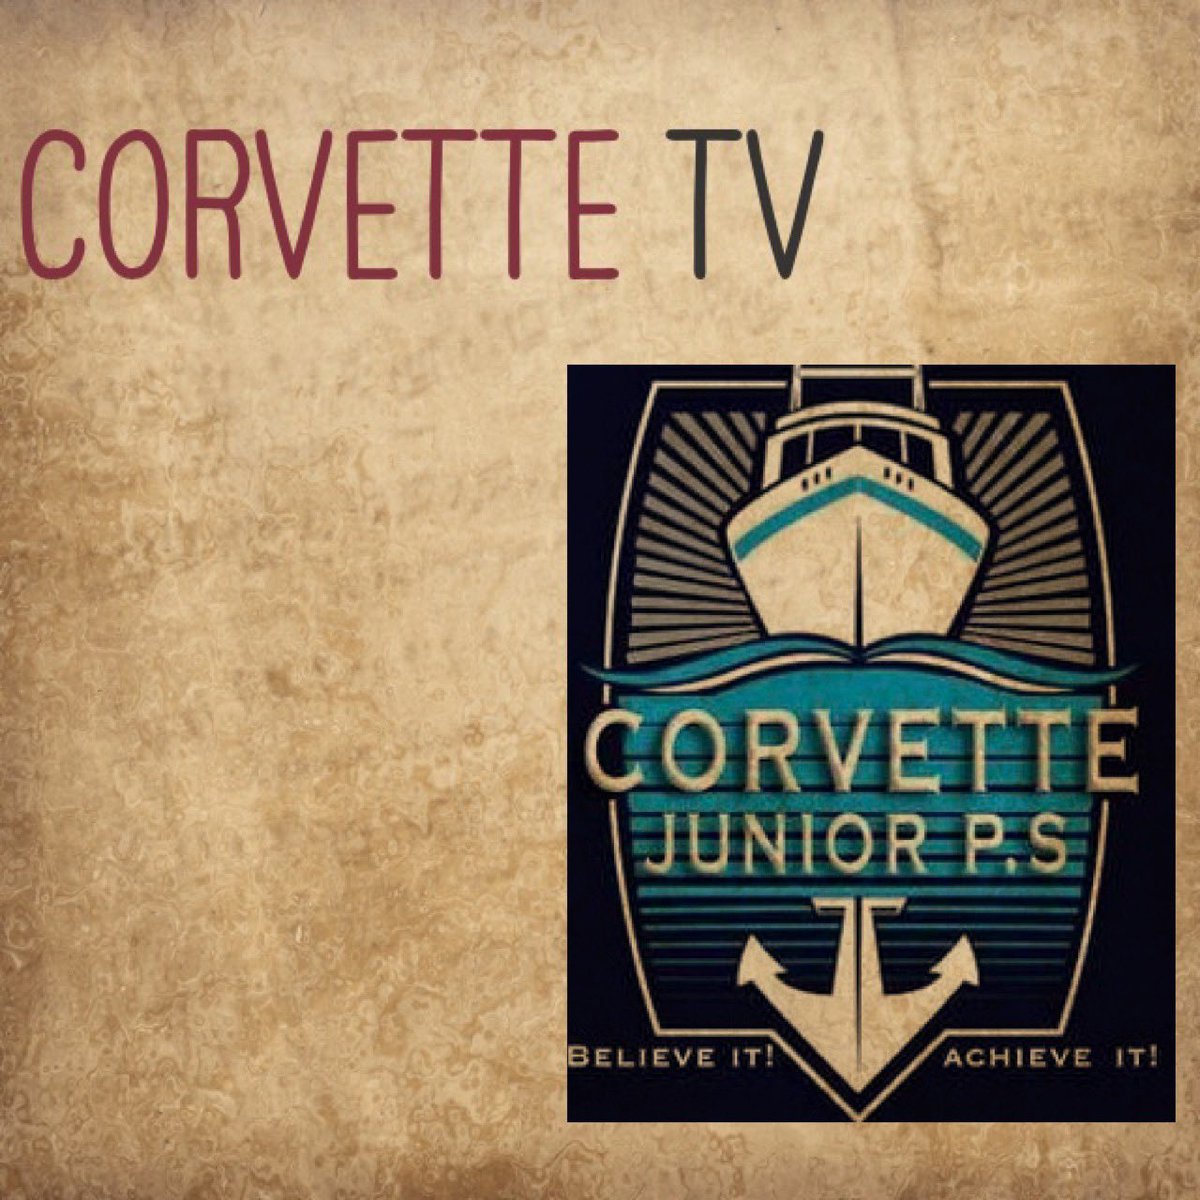 Student leaders have stepped up and are ready to go on stage! We proudly introduce the new CTV (Corvette TV) - home of the daily video morning announcements! How and where will the student leaders take this? Can’t wait to see!!